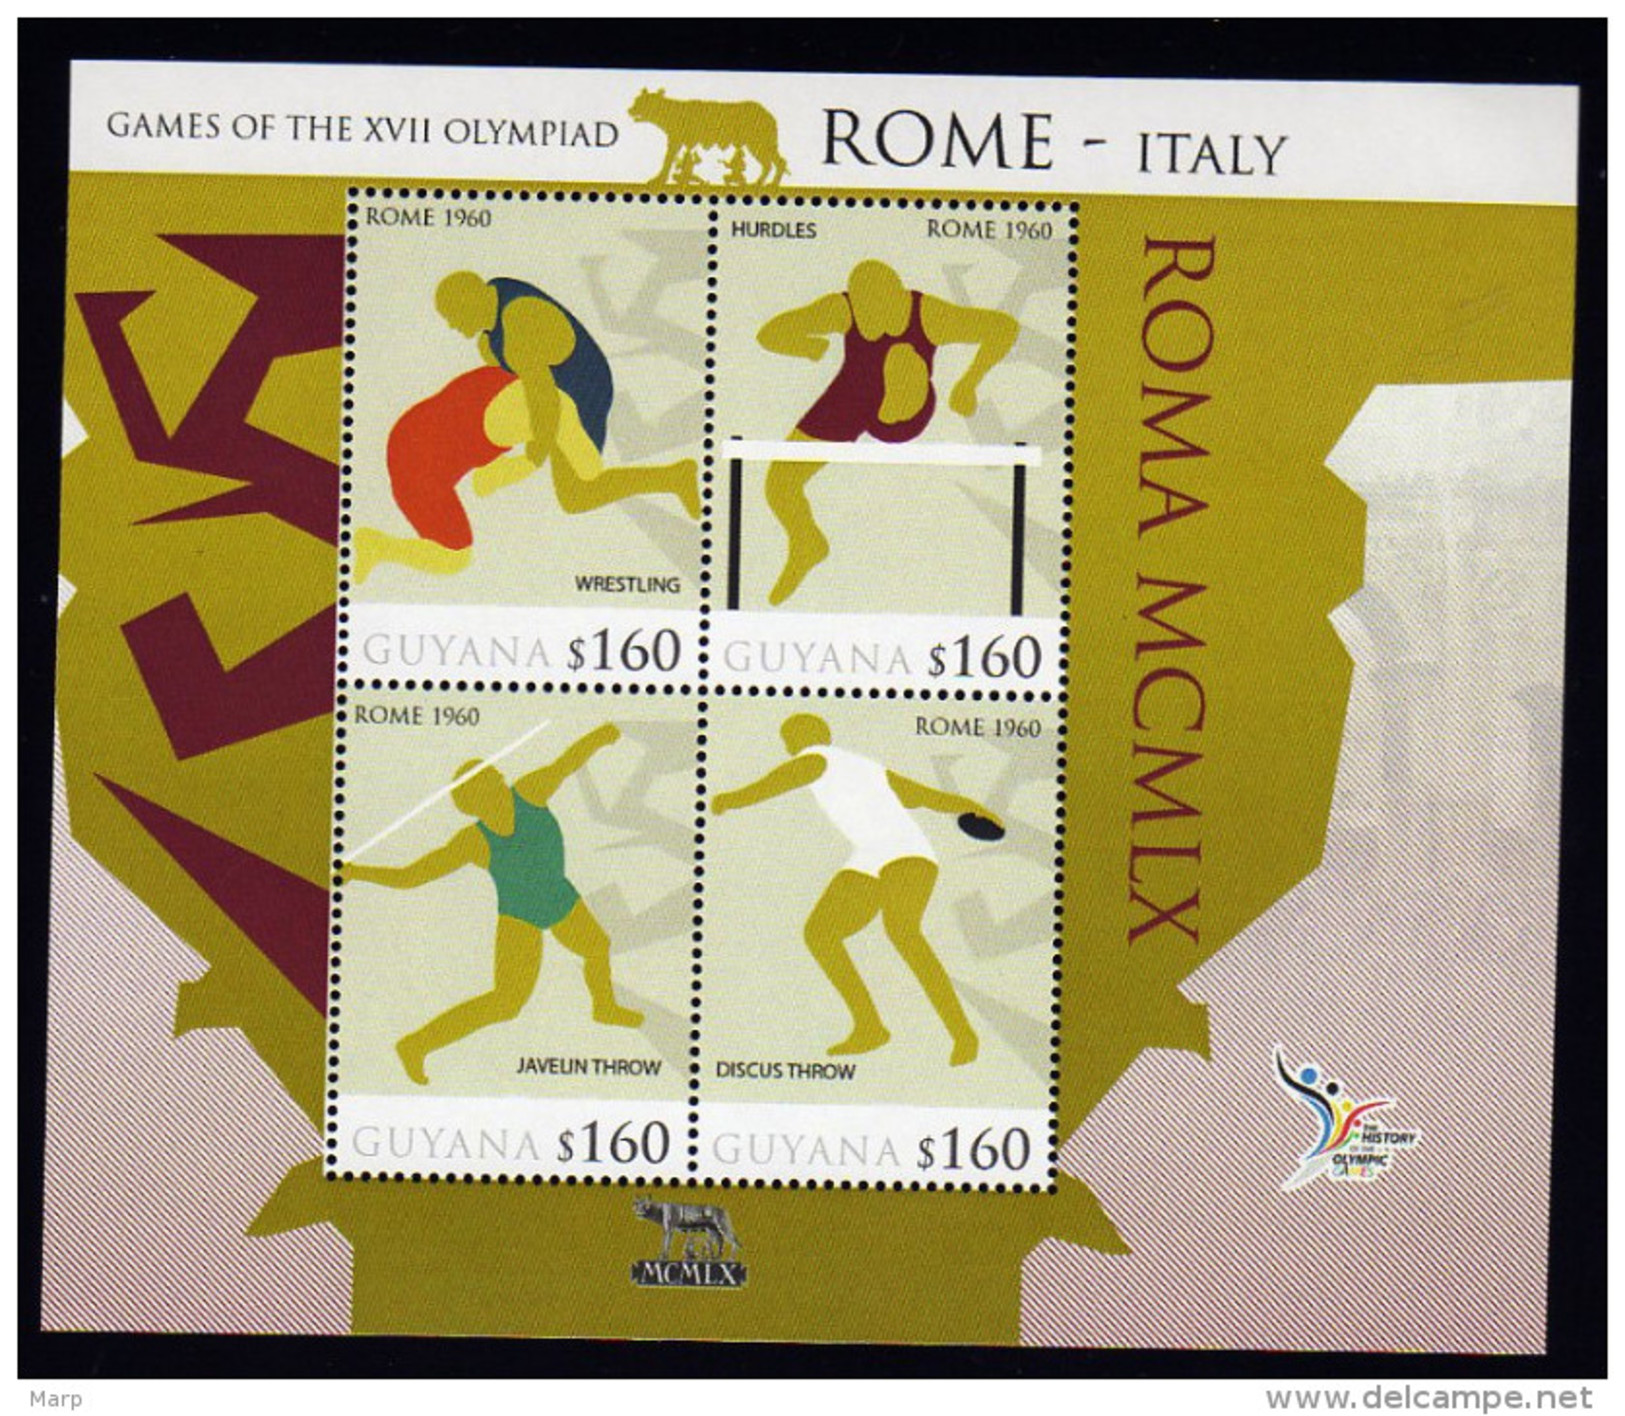 Guyana S/Sheet Mnh History Olympic Games Rome 1960 Wrestling/Hurdles/Discus And Others - Ete 1960: Rome